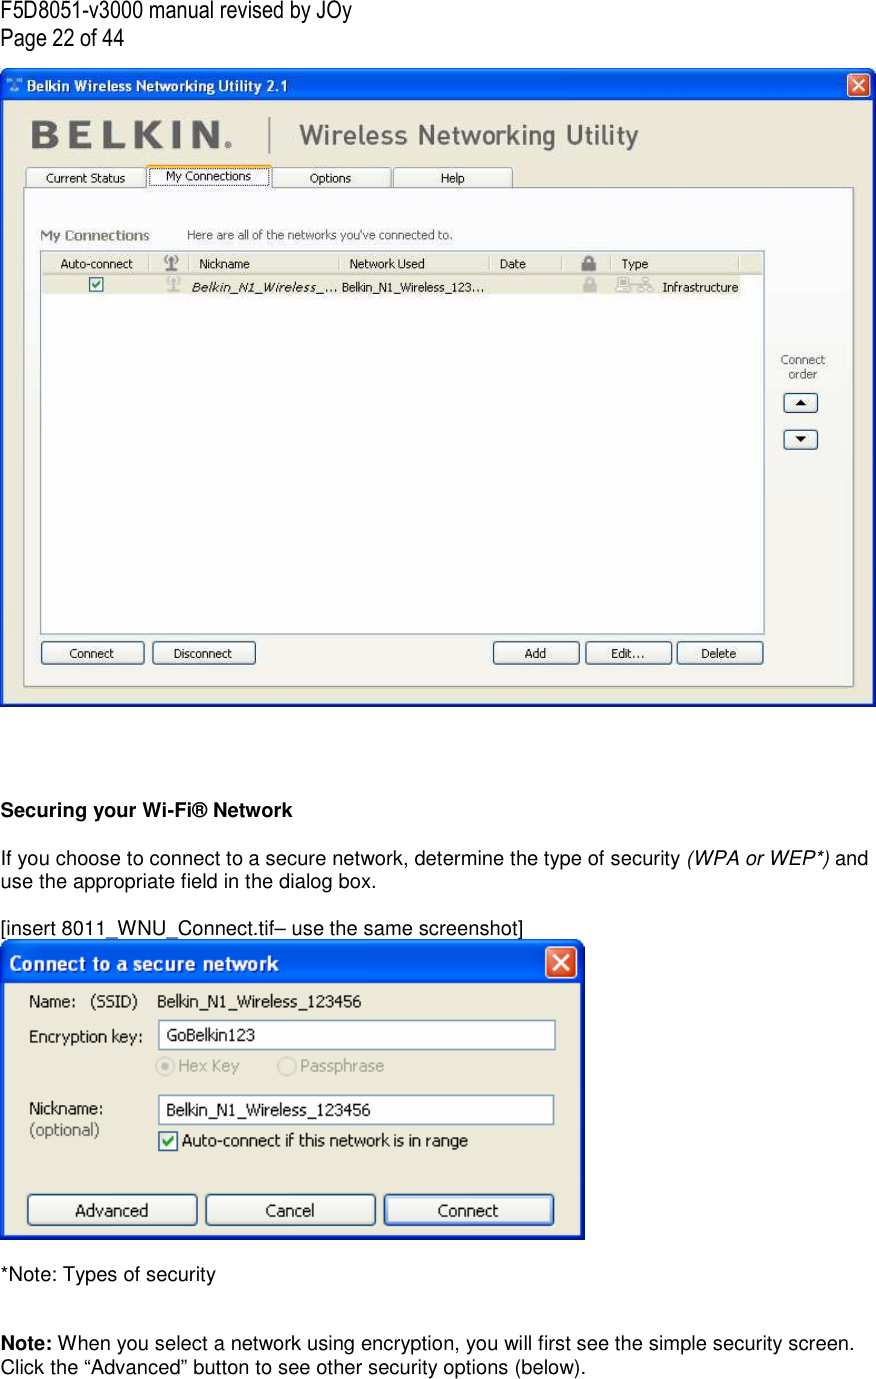 F5D8051-v3000 manual revised by JOy Page 22 of 44      Securing your Wi-Fi® Network  If you choose to connect to a secure network, determine the type of security (WPA or WEP*) and use the appropriate field in the dialog box.  [insert 8011_WNU_Connect.tif– use the same screenshot]   *Note: Types of security   Note: When you select a network using encryption, you will first see the simple security screen. Click the “Advanced” button to see other security options (below).  